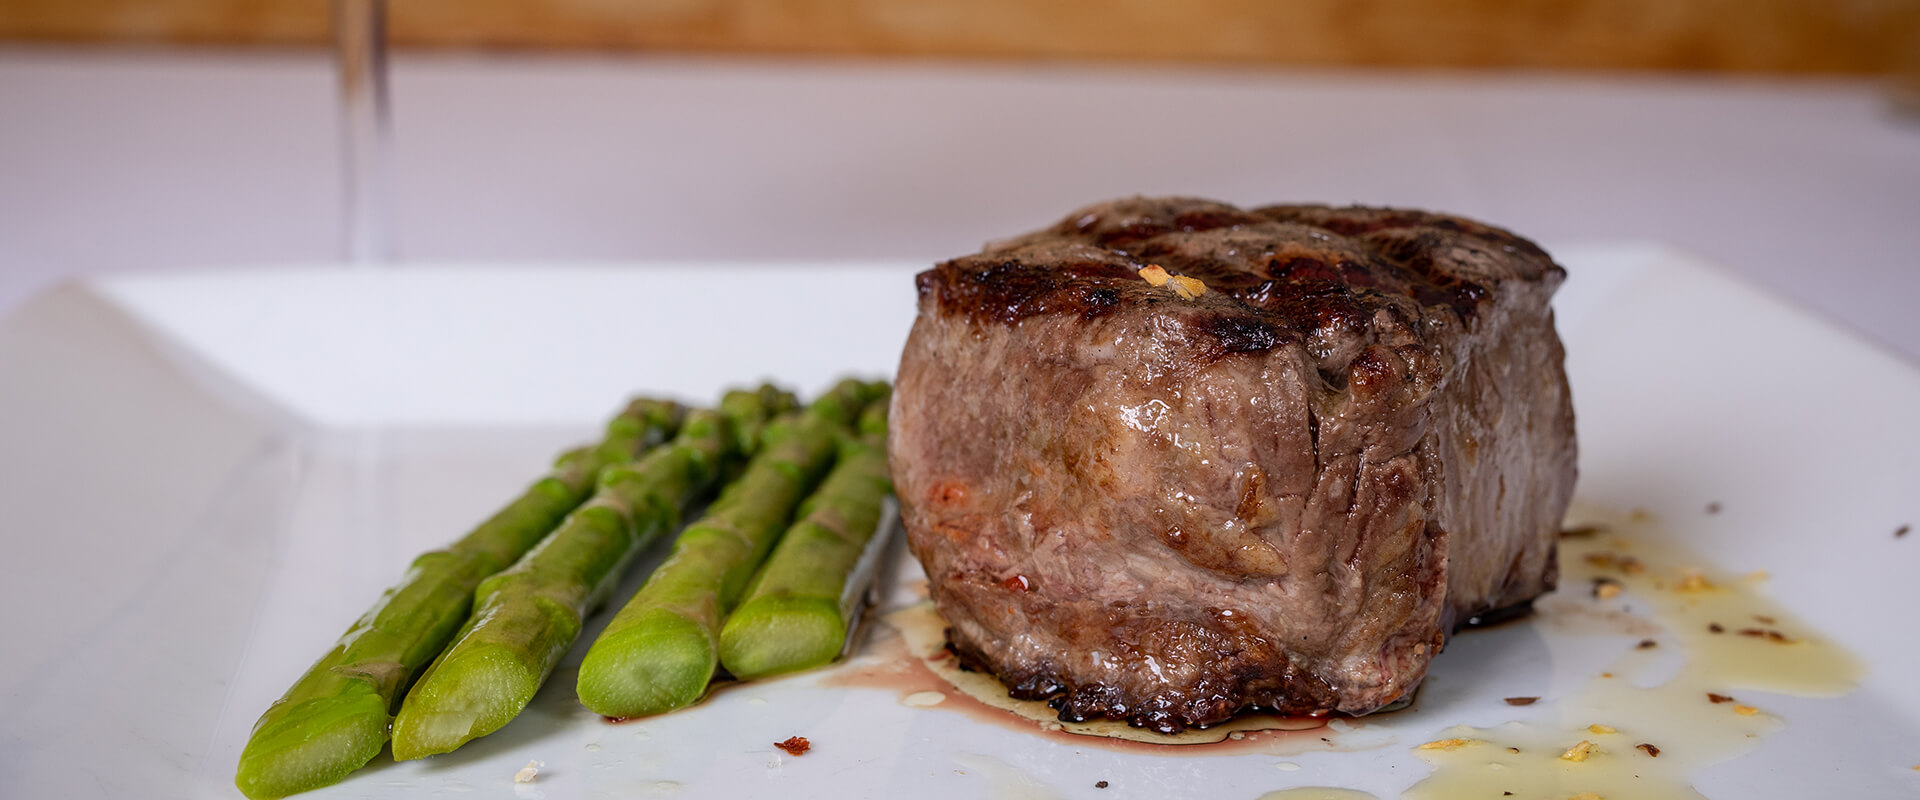 filet mignon with a side of asparagus